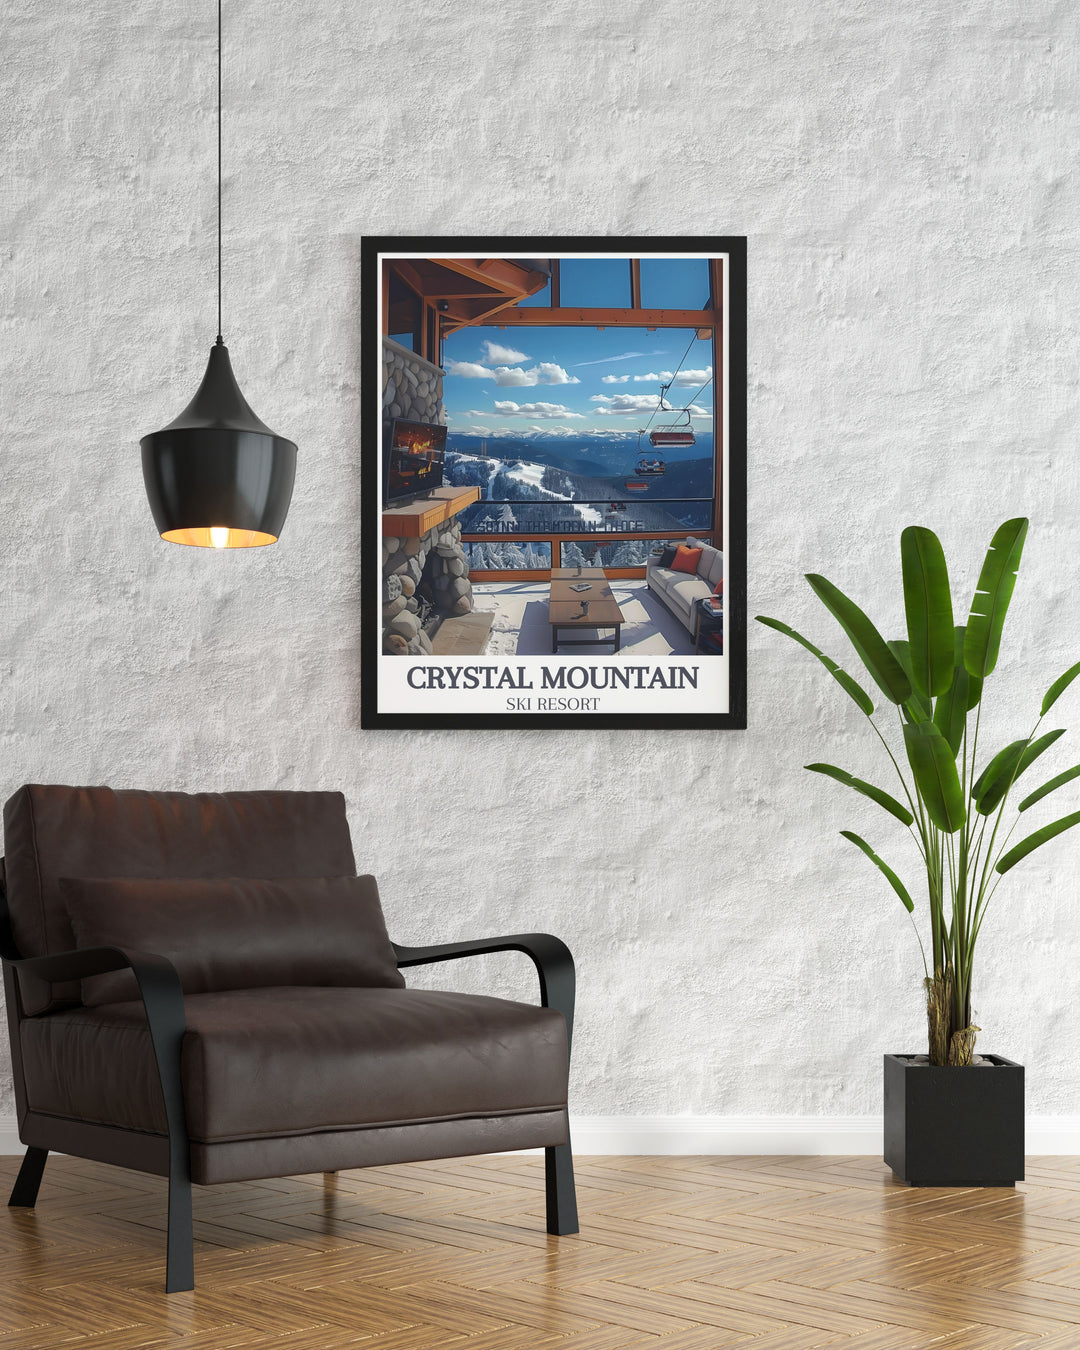 Custom print highlighting the excitement of skiing at Crystal Mountain with the iconic presence of Mount Rainier, a perfect gift for adventurers.